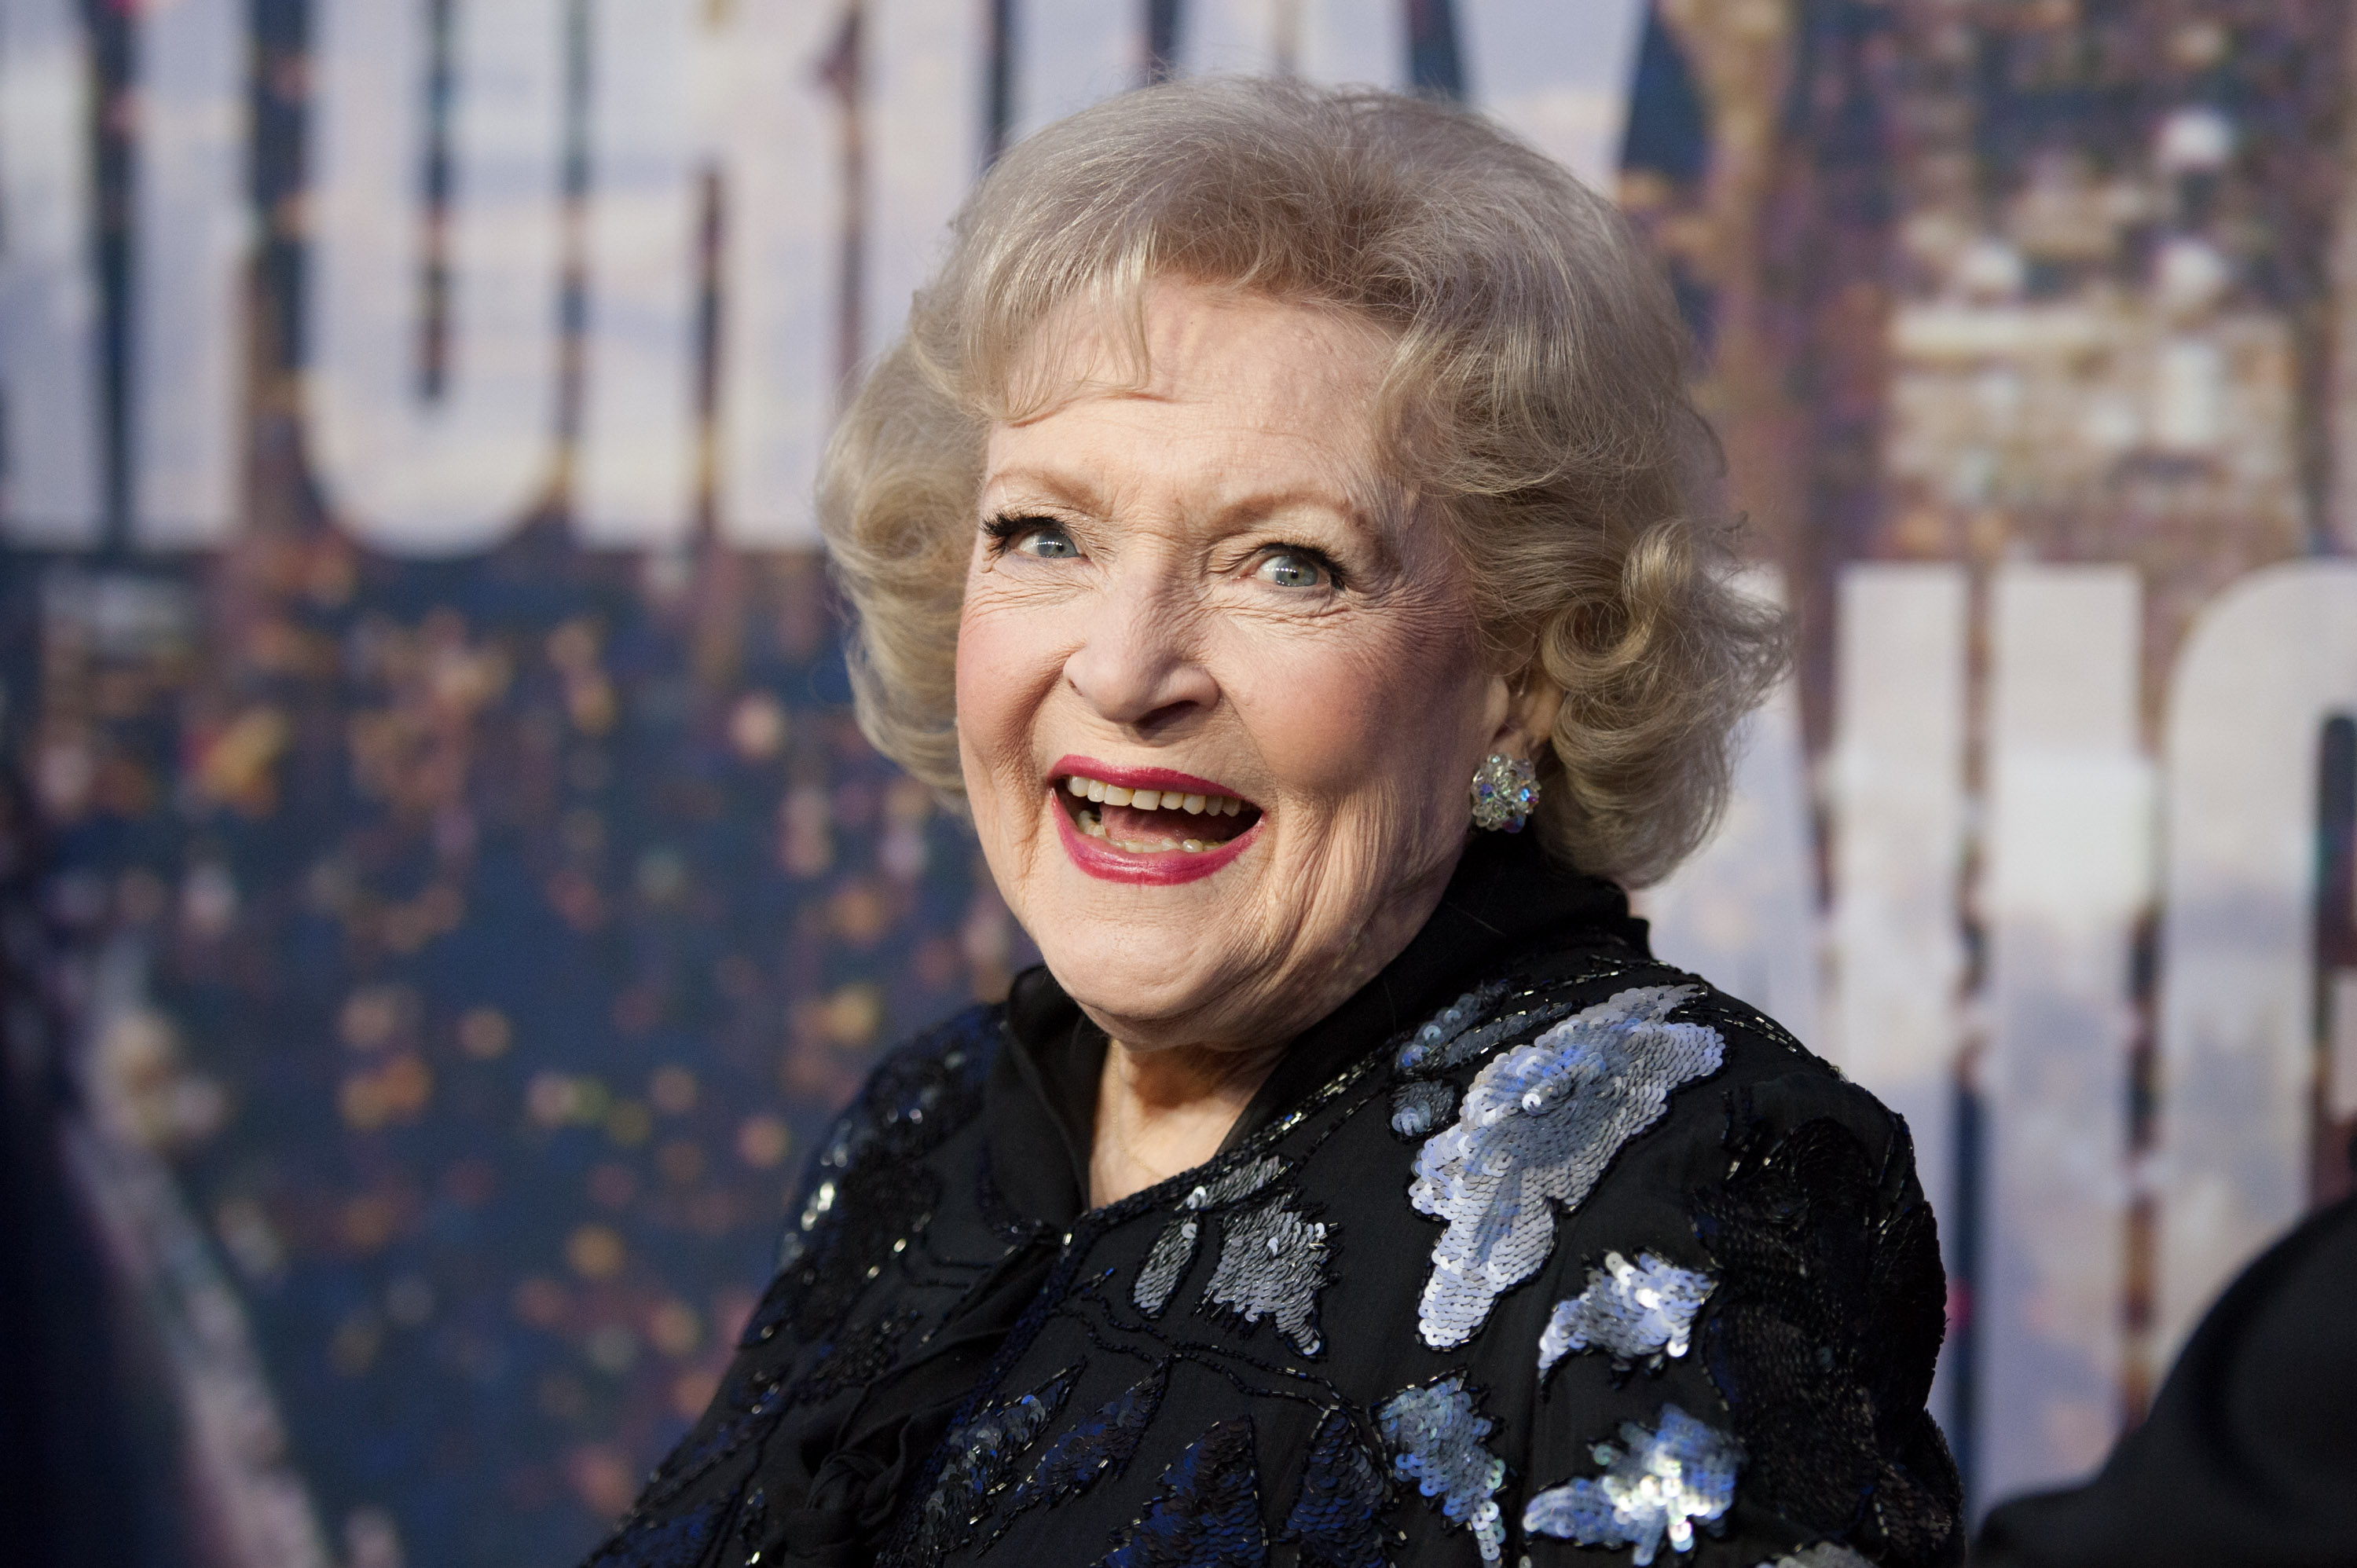 Betty White attends the SNL 40th Anniversary Celebration at Rockefeller Plaza